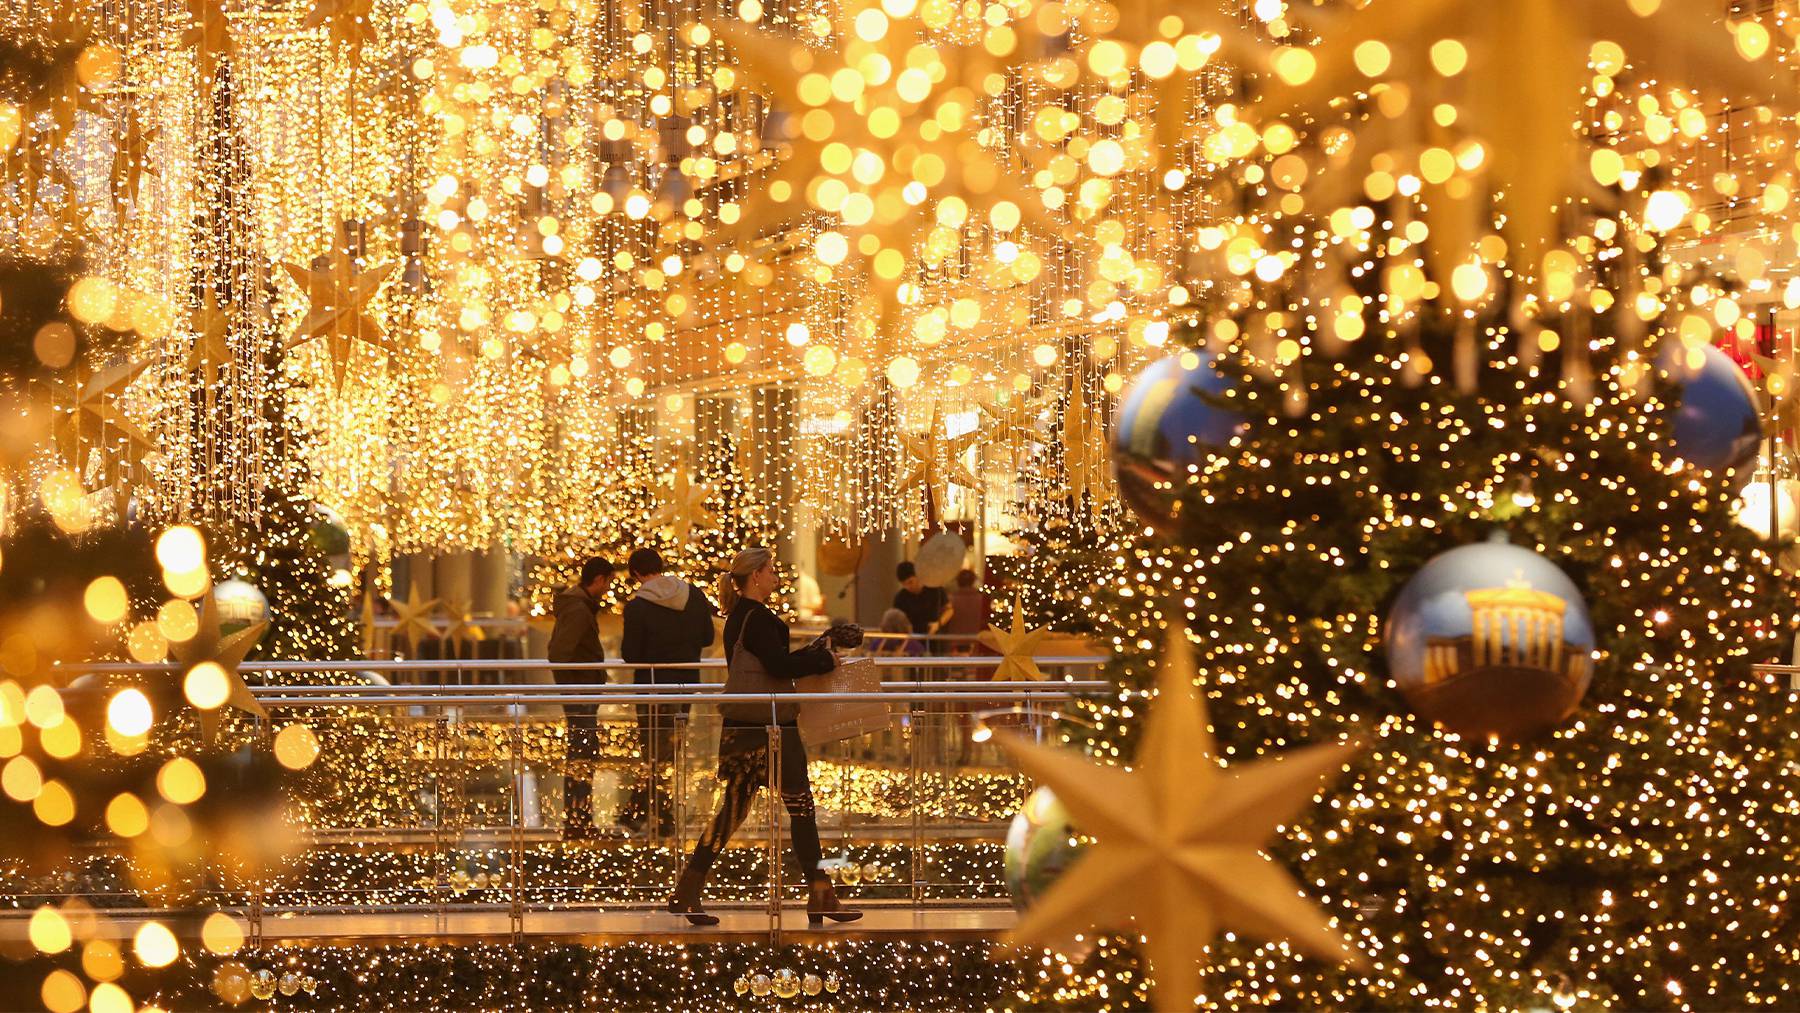 Shoppers walking through a shopping mall in Berlin, Germany lit up with Christmas decorations. Getty Images.